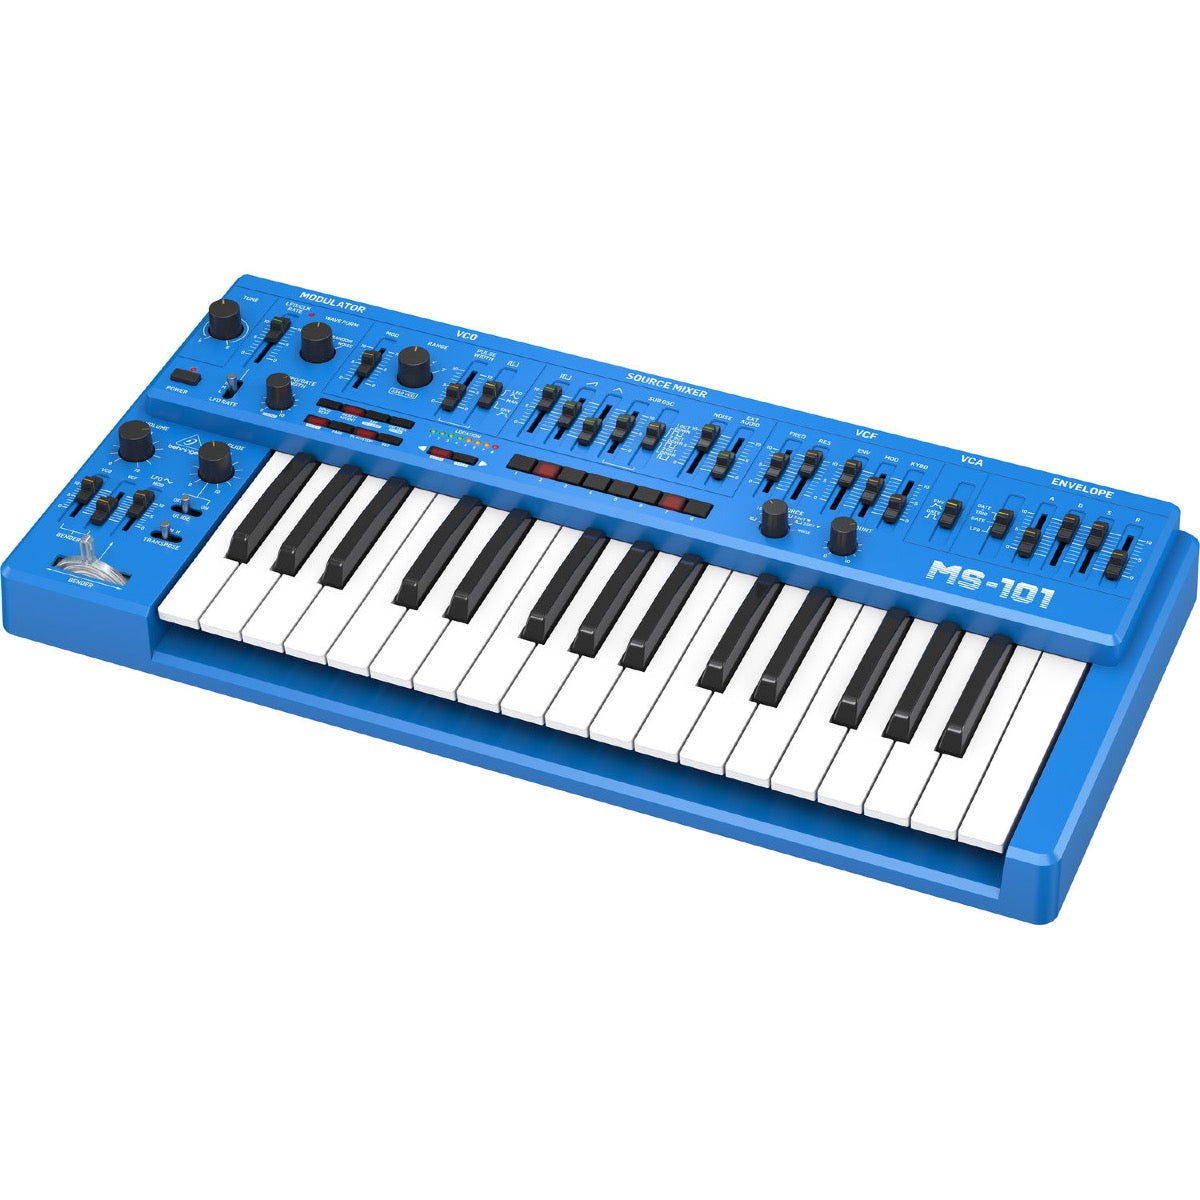 Behringer MS-1 Analog Synthesizer with Live Performance Kit - Blue